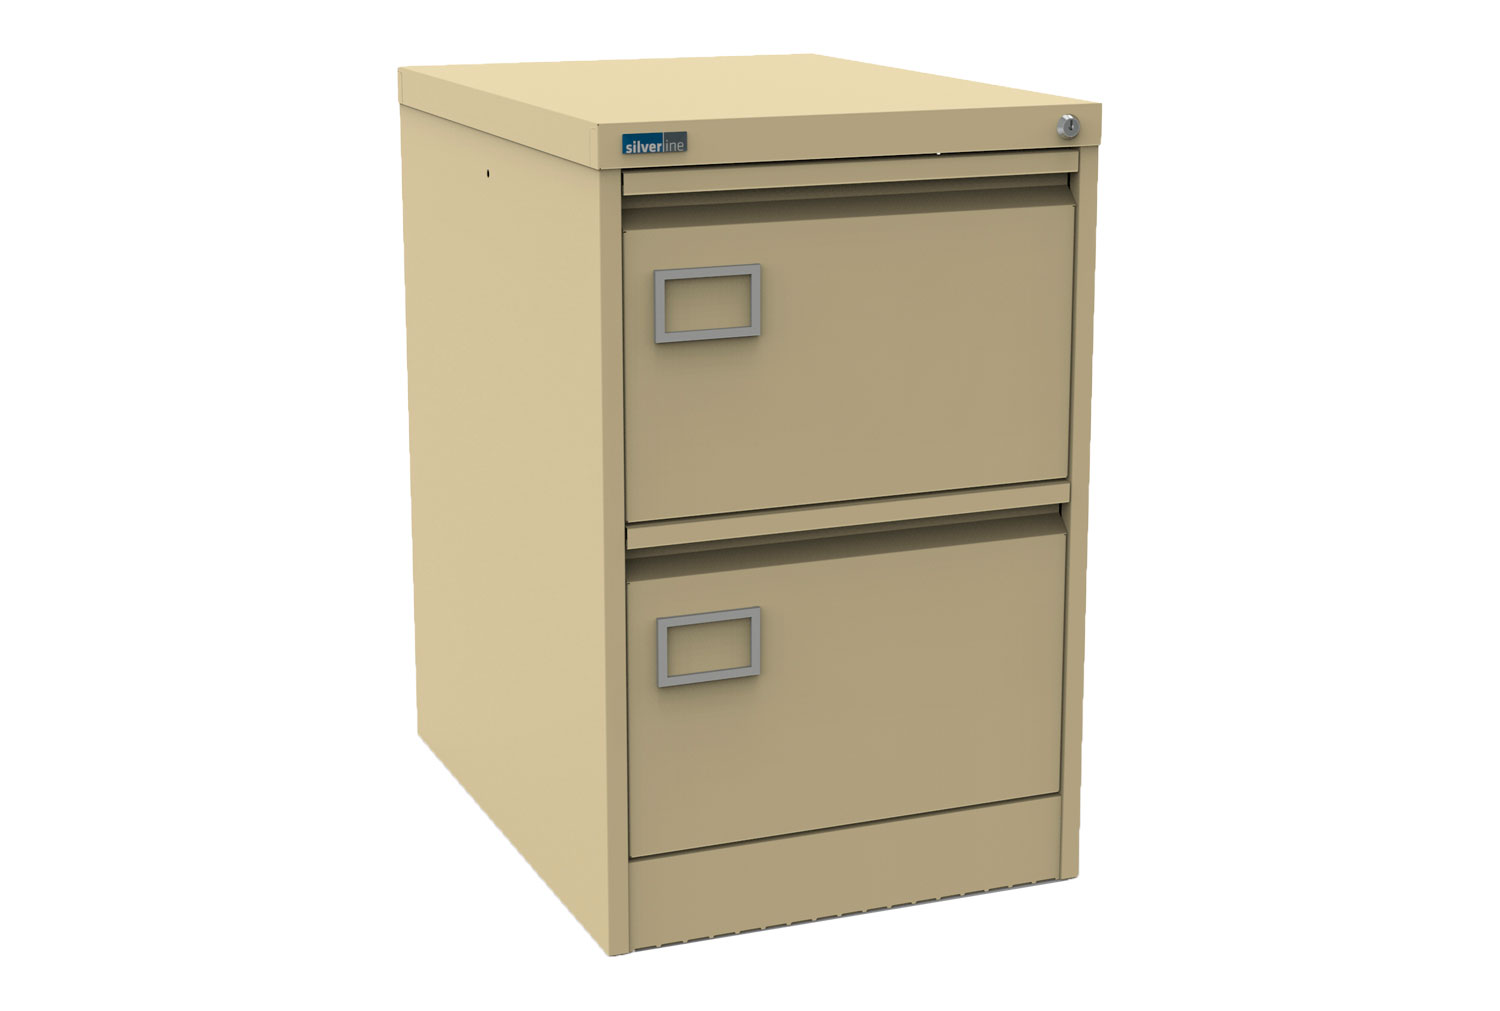 Silverline Executive 2 Drawer Filing Cabinets, 2 Drawer - 46wx62dx71h (cm), Beige, Fully Installed